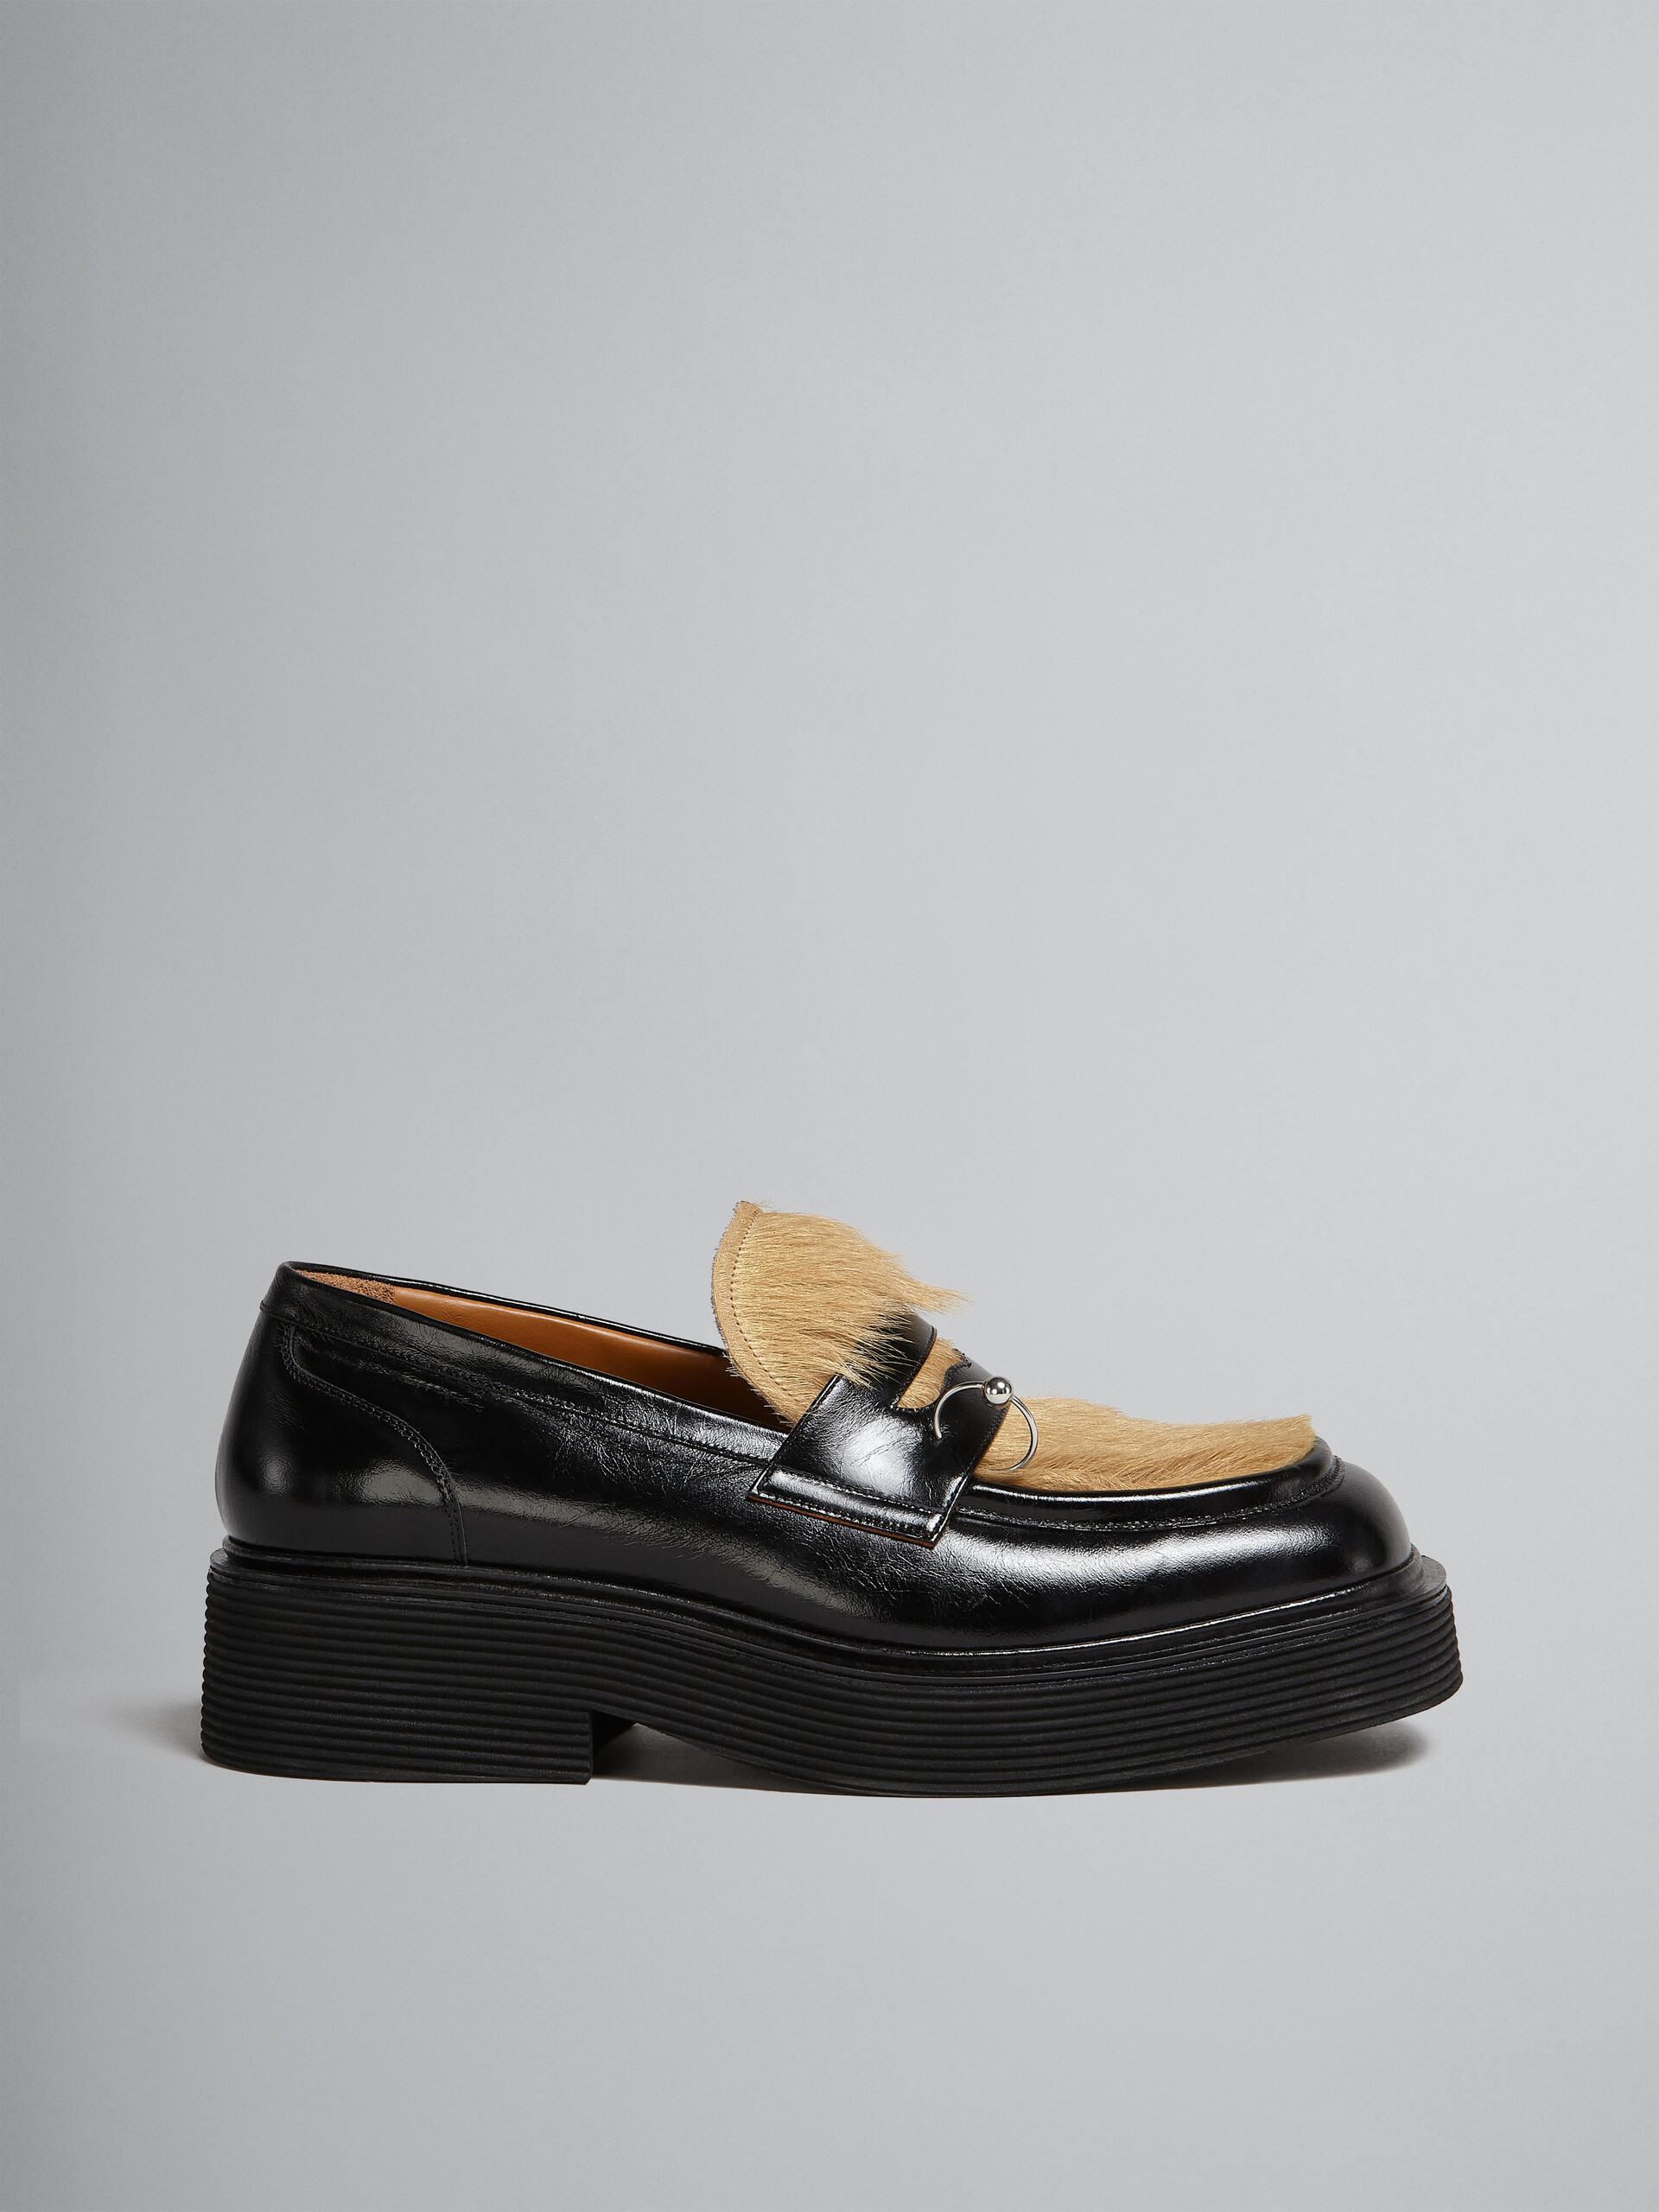 Black leather and beige long hair calfskin moccasin - Mocassin - Image 1